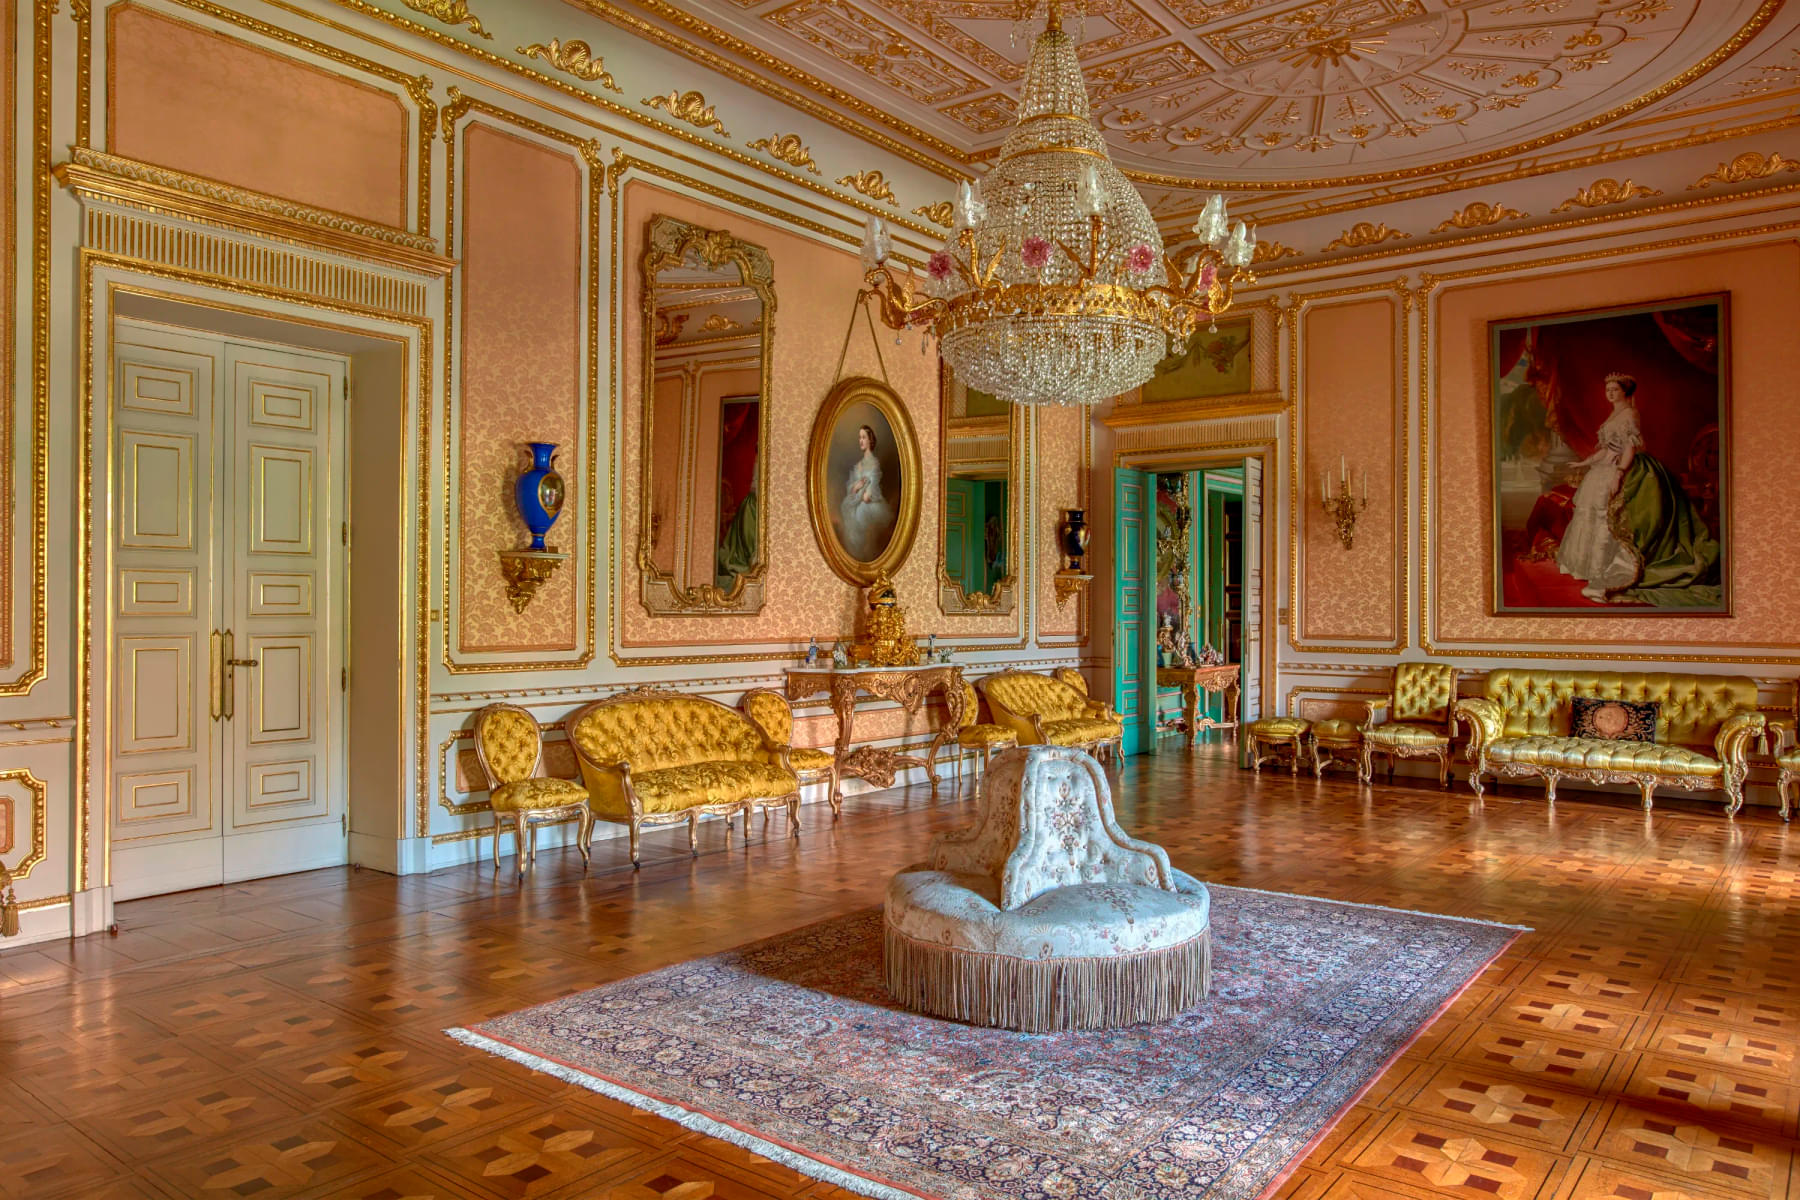 Visit the 14 most important rooms in the Palace